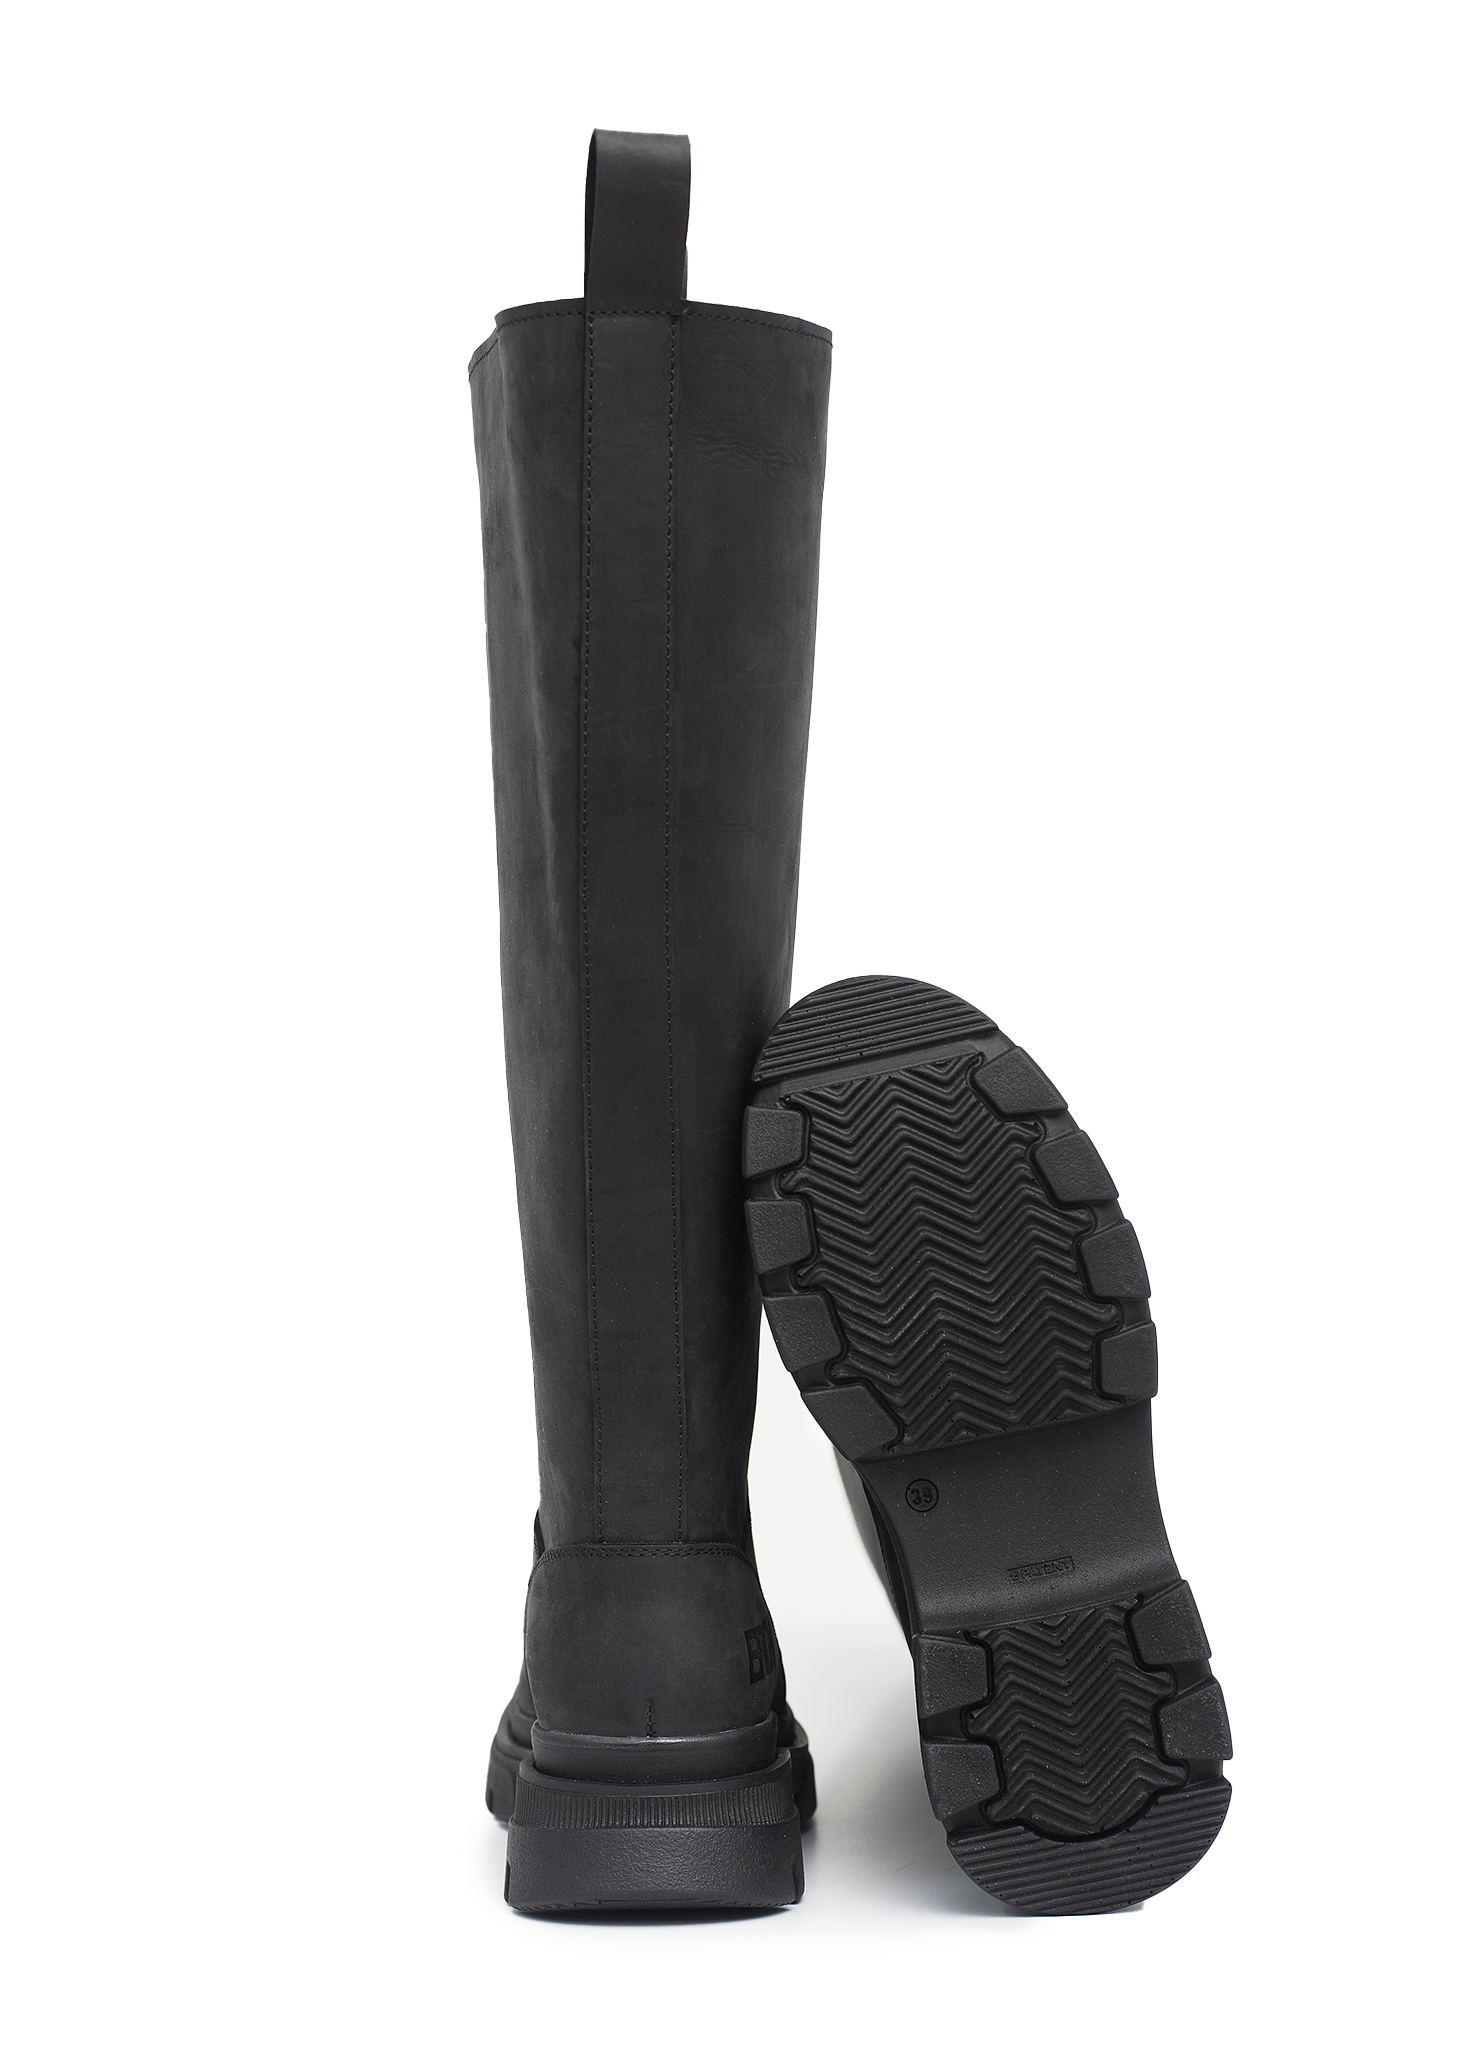 BRGN High Leather Boots Shoes 095 New Black